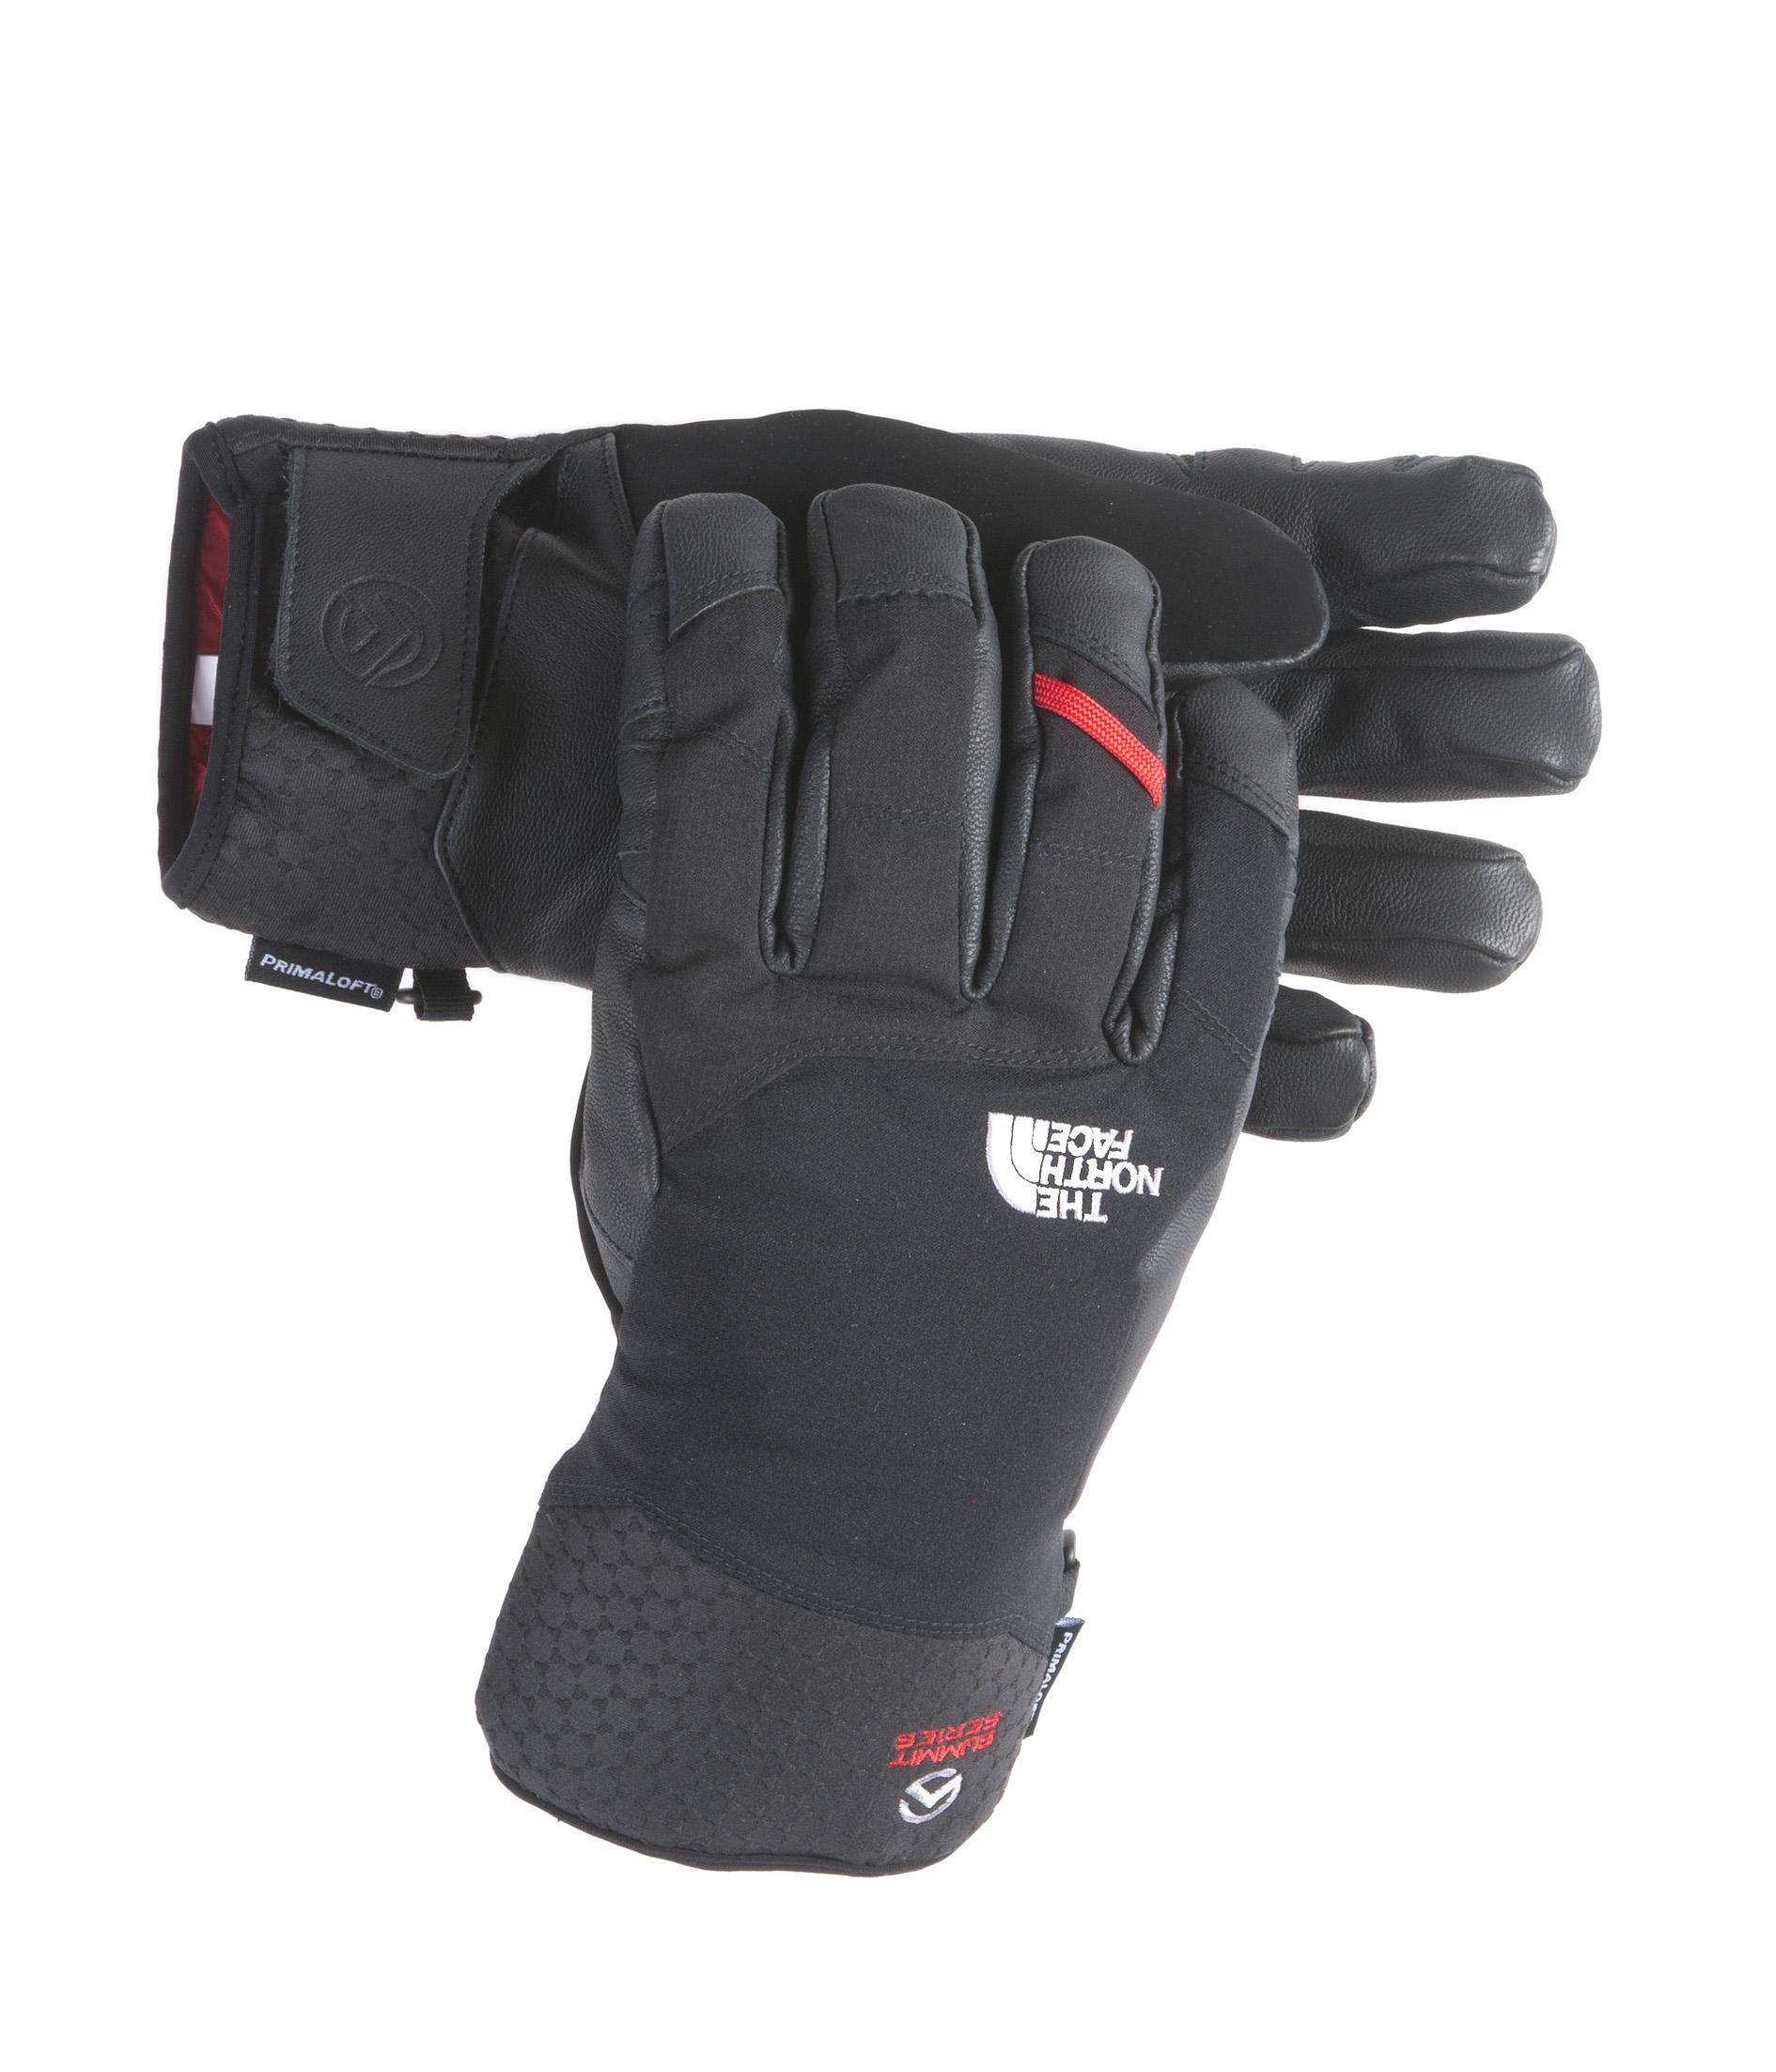 Foto The North Face Patrol Gloves foto 241070